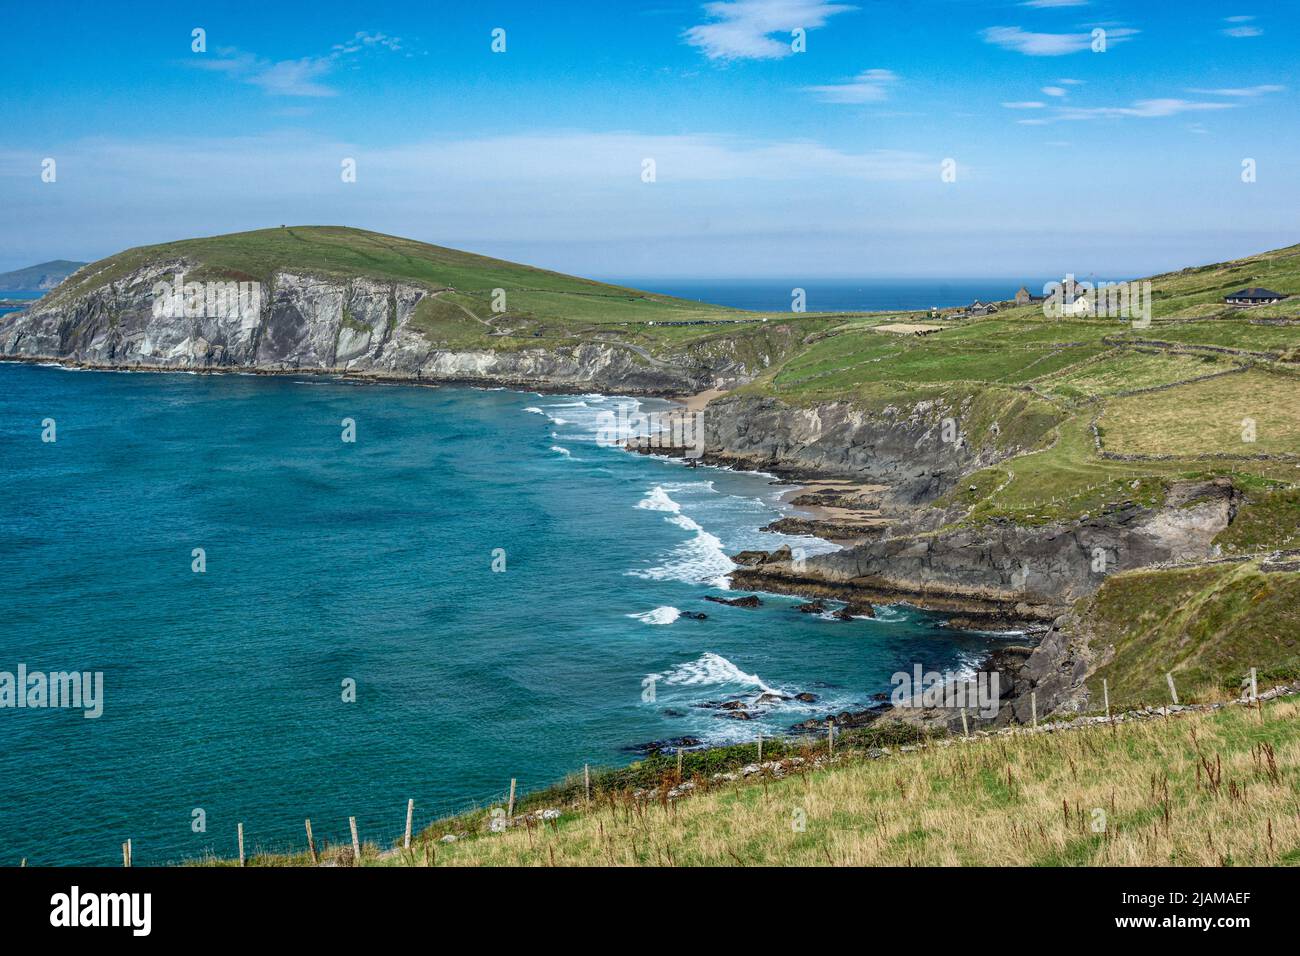 View of the coast of Coumeenoole beach from the Slea Head Drive in the Dingle Peninsula, Dingle, Ireland Stock Photo